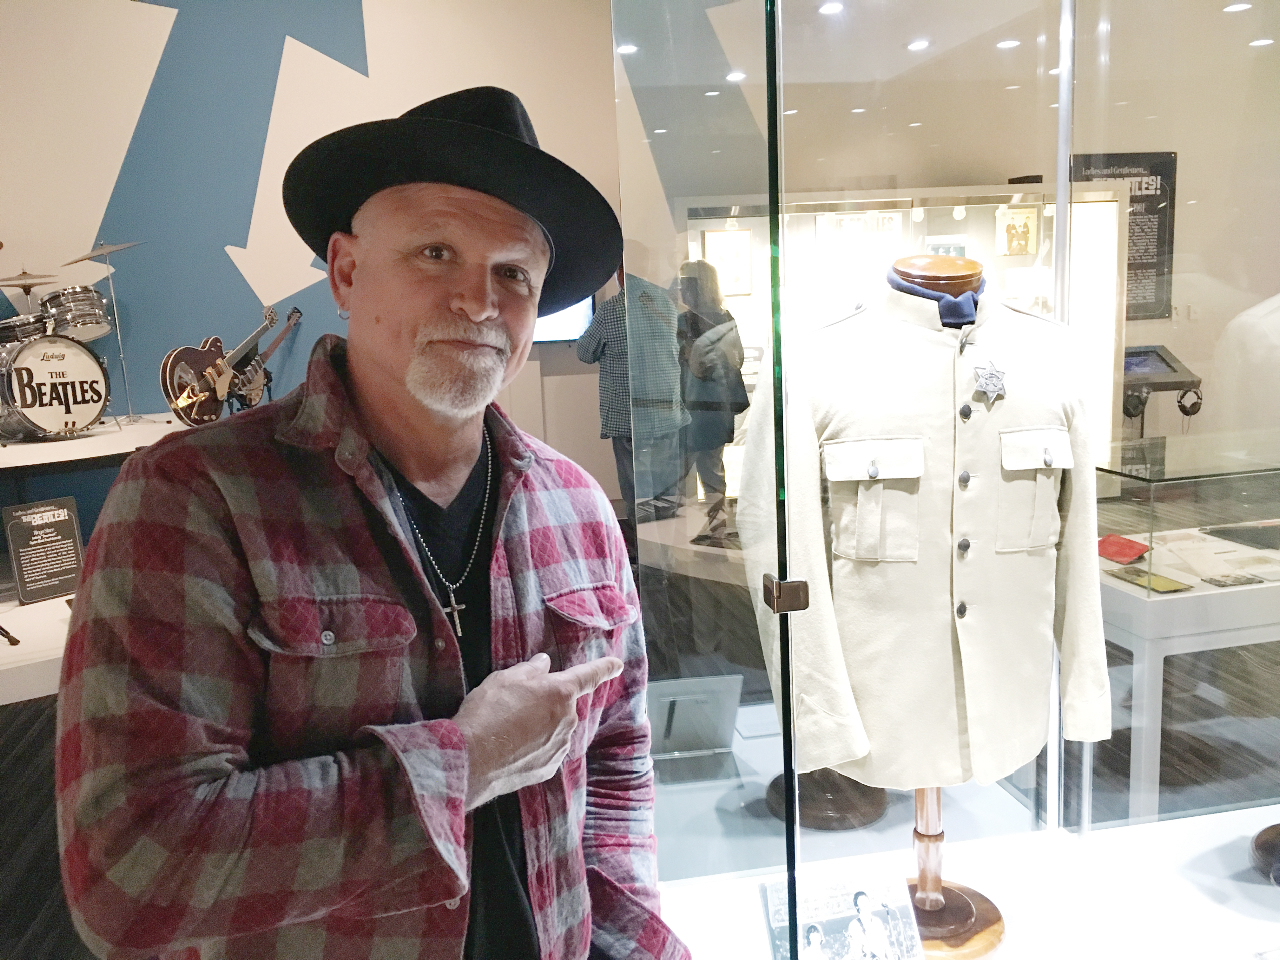 Rocker, Derek St. Holmes standing next to the jacket worn by Paul McCartney at the famous Shea Stadium concert which is one of many Beatles’ items on display at GRAMMY Museum Mississippi in Cleveland.